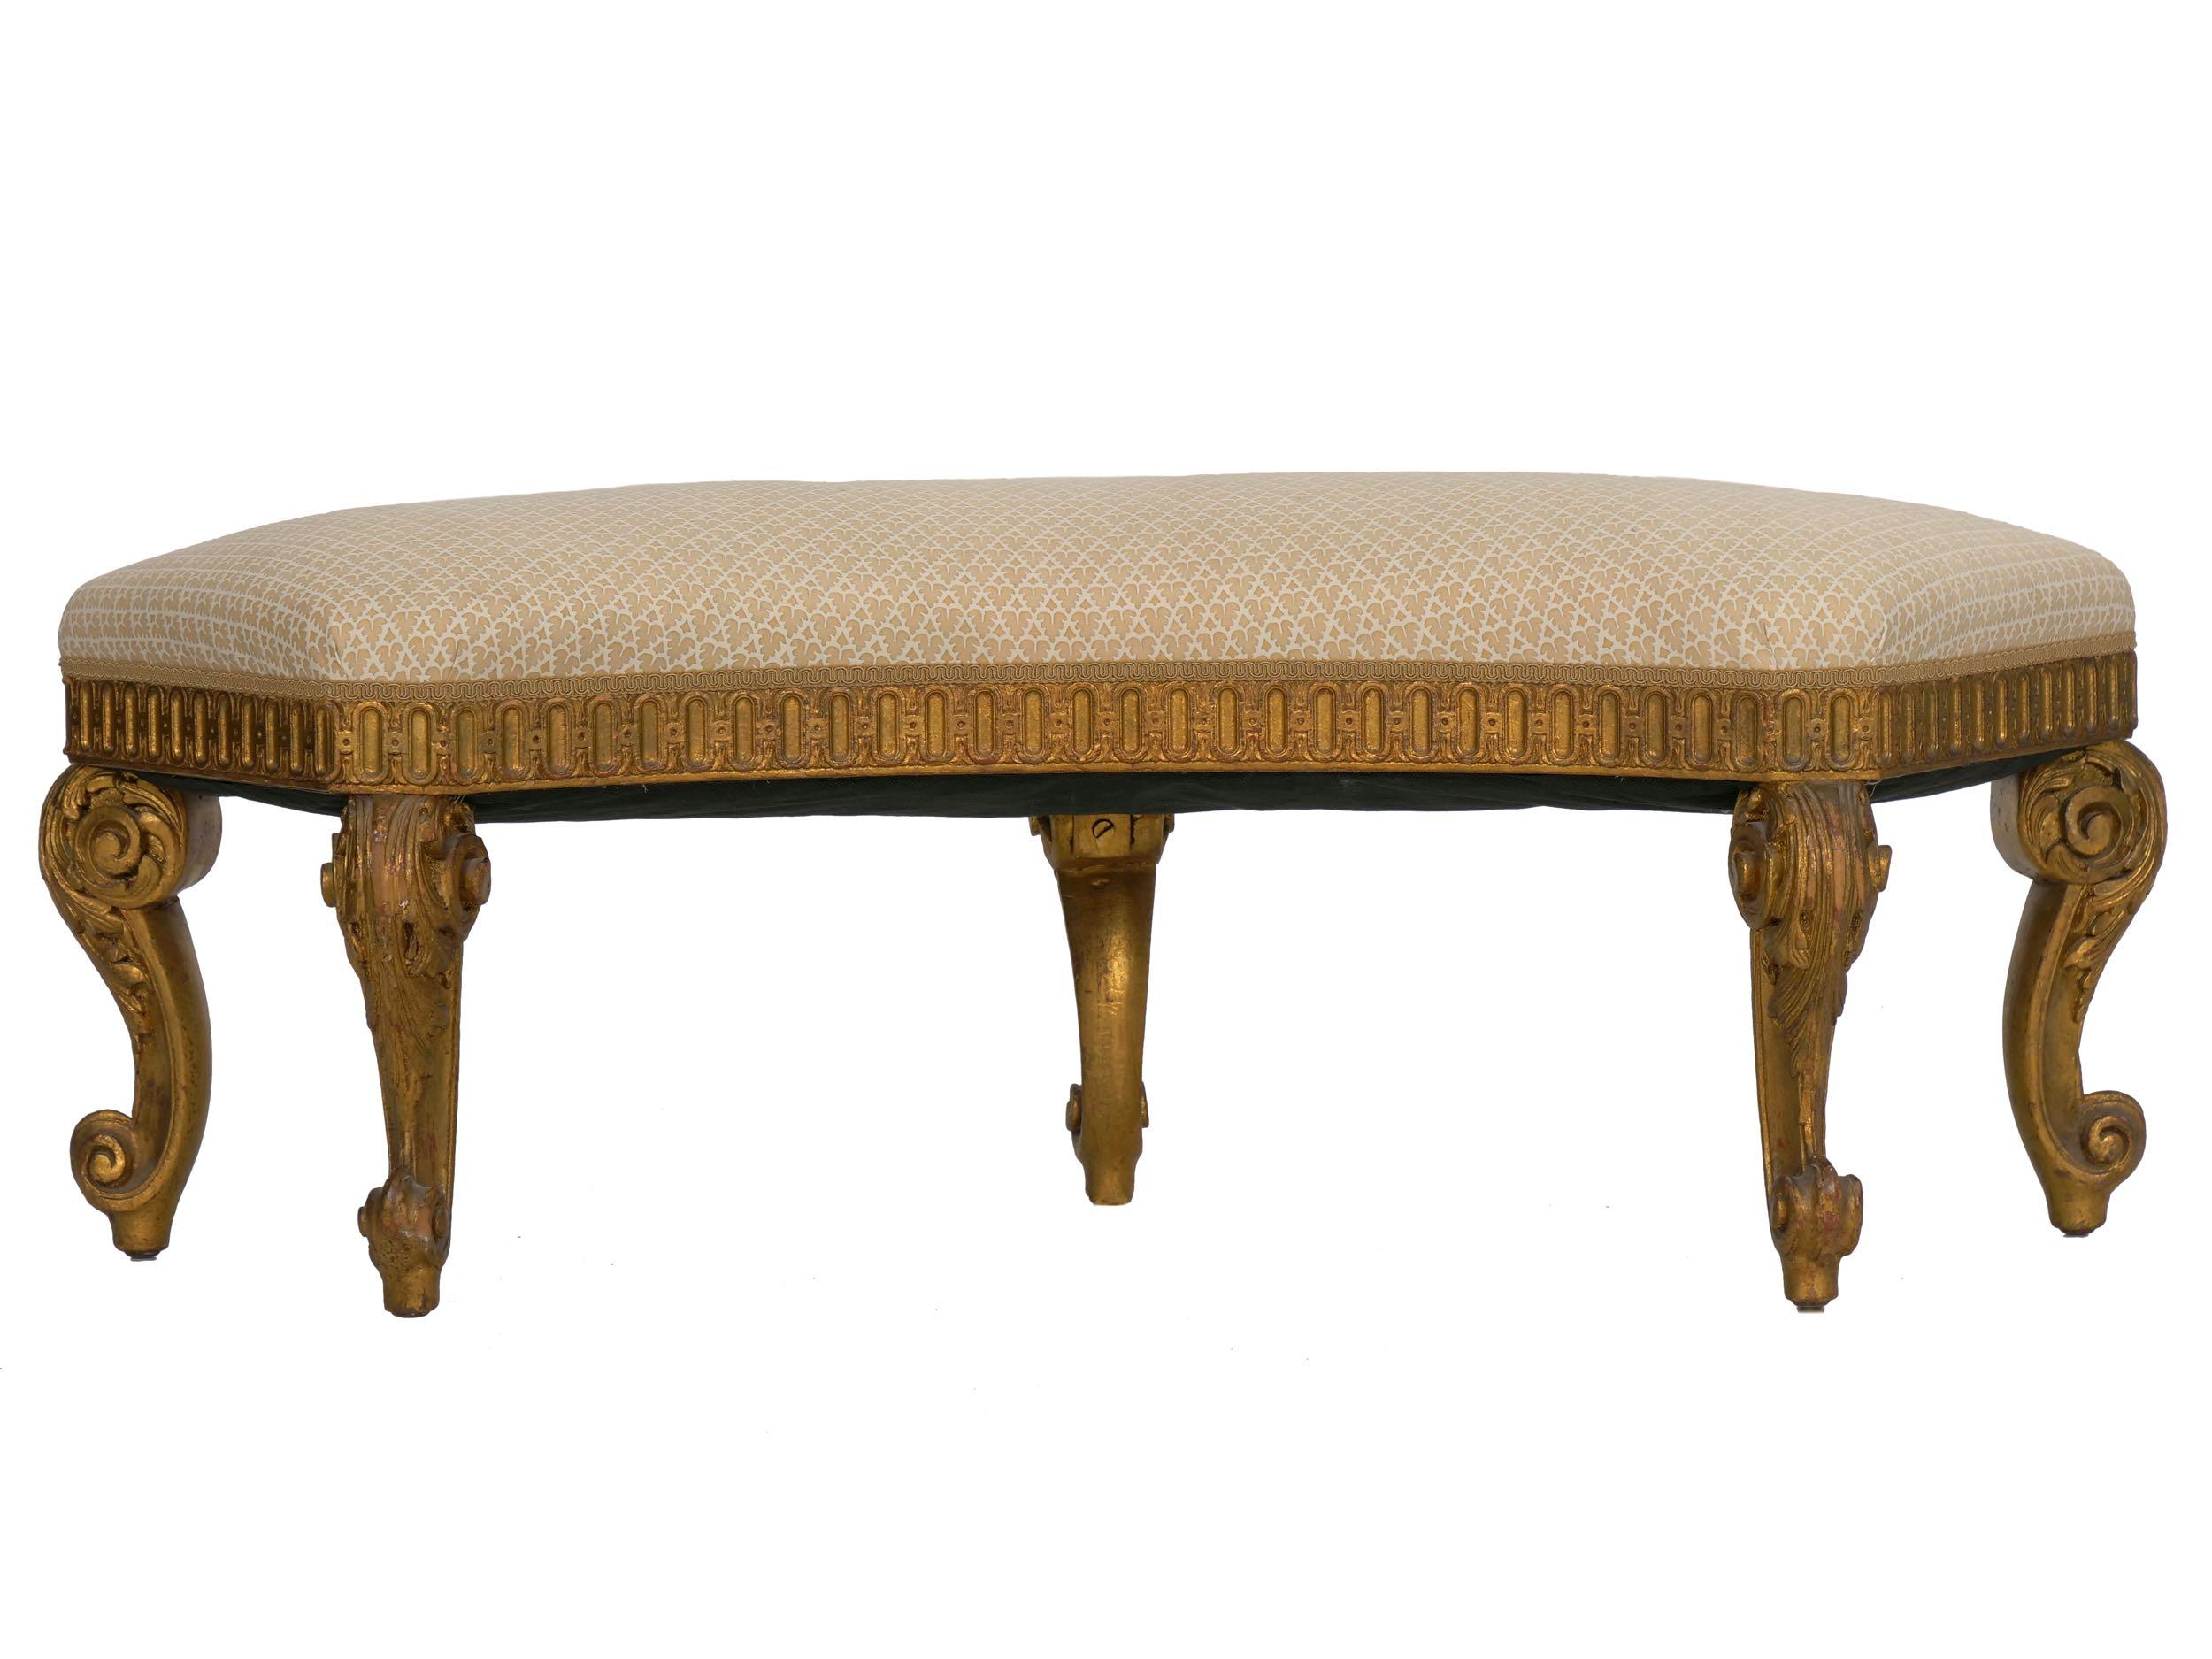 A quality Regency style reproduction crescent curved bench, the robust cabriole legs are attractively carved and gilded with hints of red bole showing through beneath faux and natural wear. There is strength and robustness in the form that is most